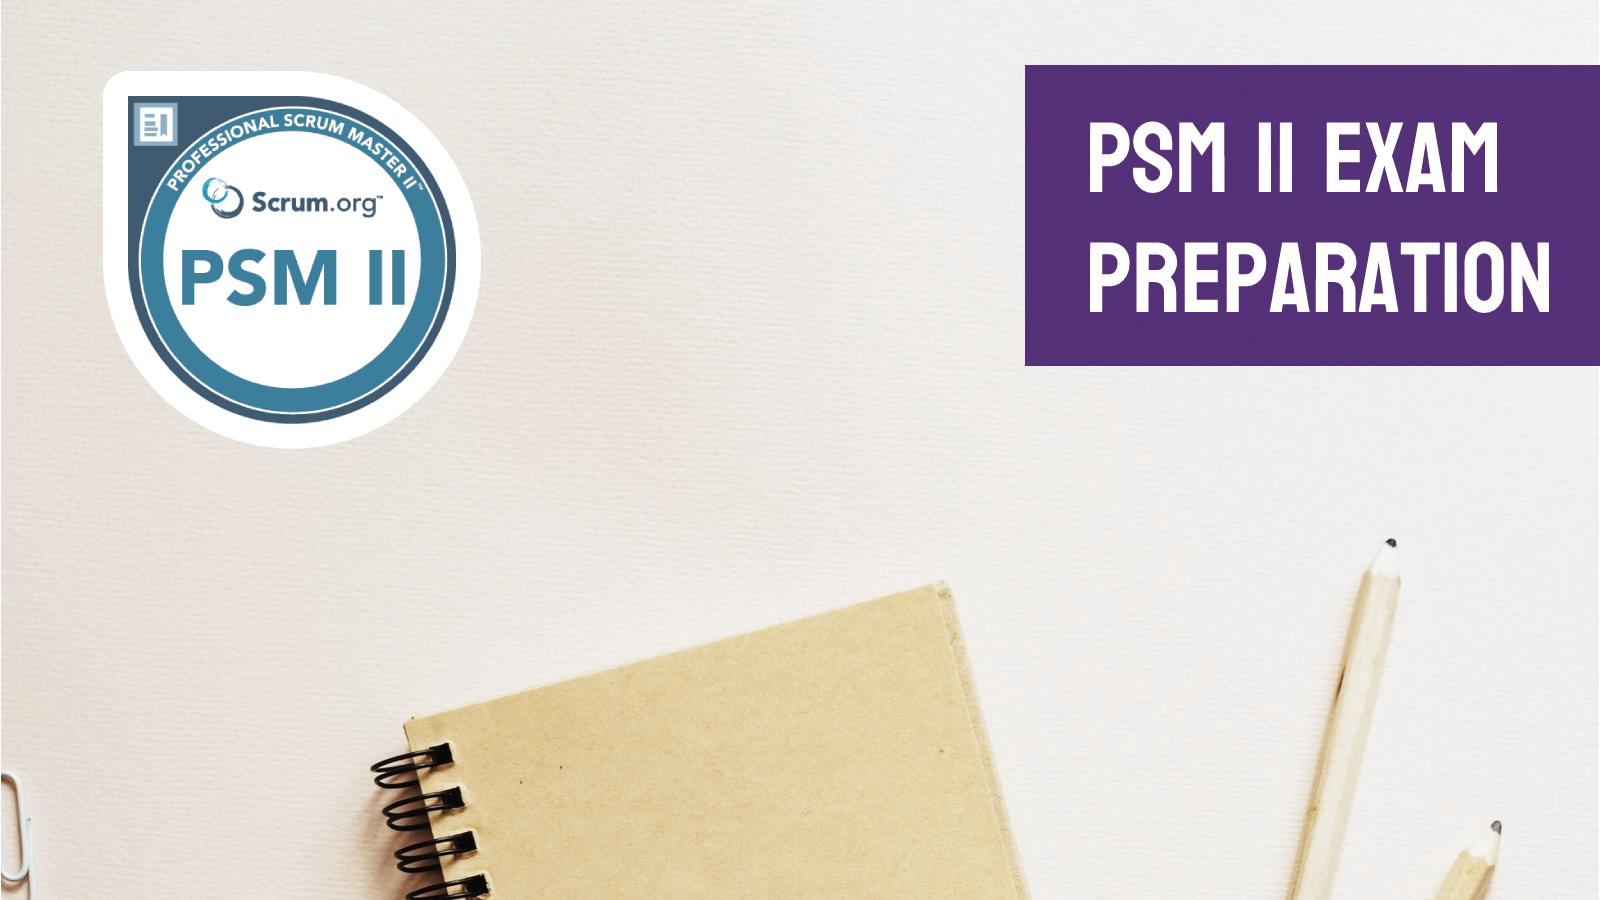 How to prepare for the PSM 2 certification exam and successfully pass it on the first try?